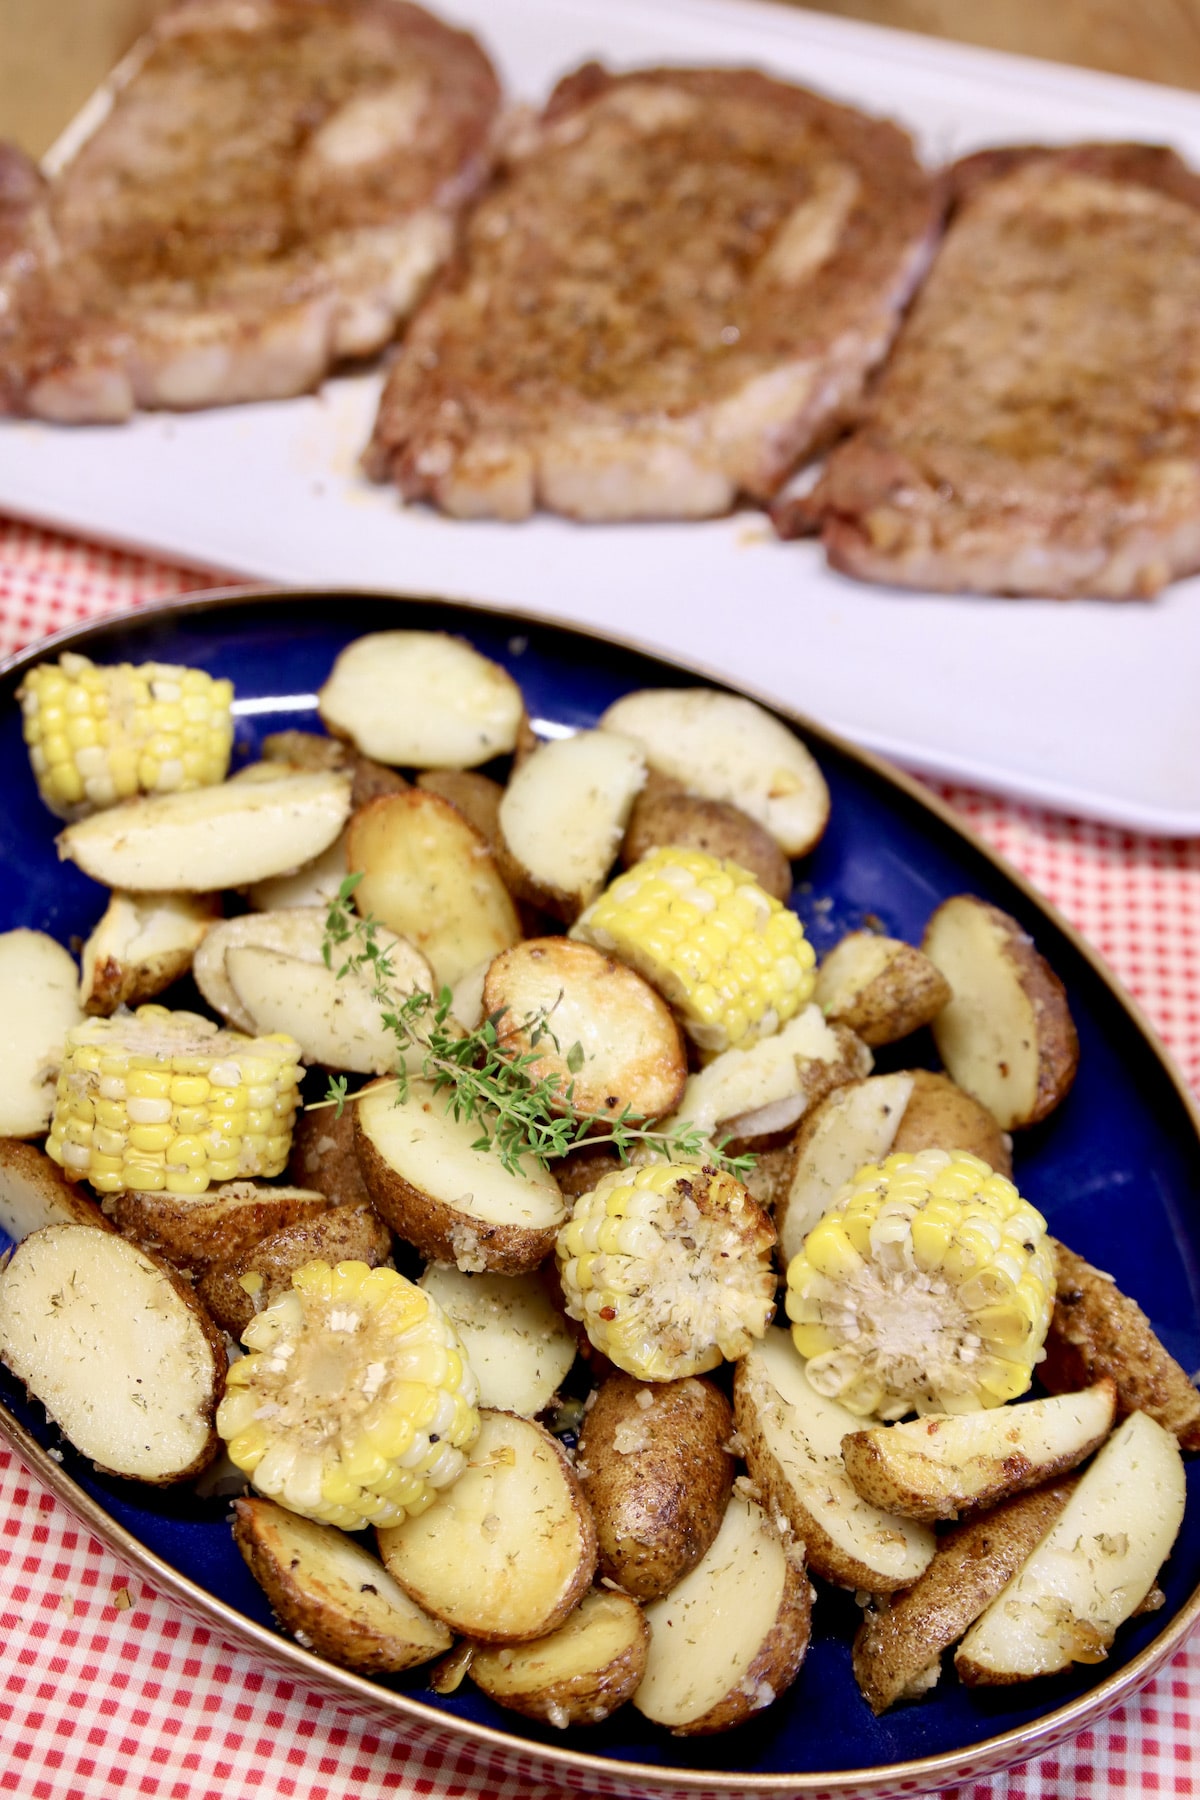 Platter of potatoes and corn with platter of grilled steaks.